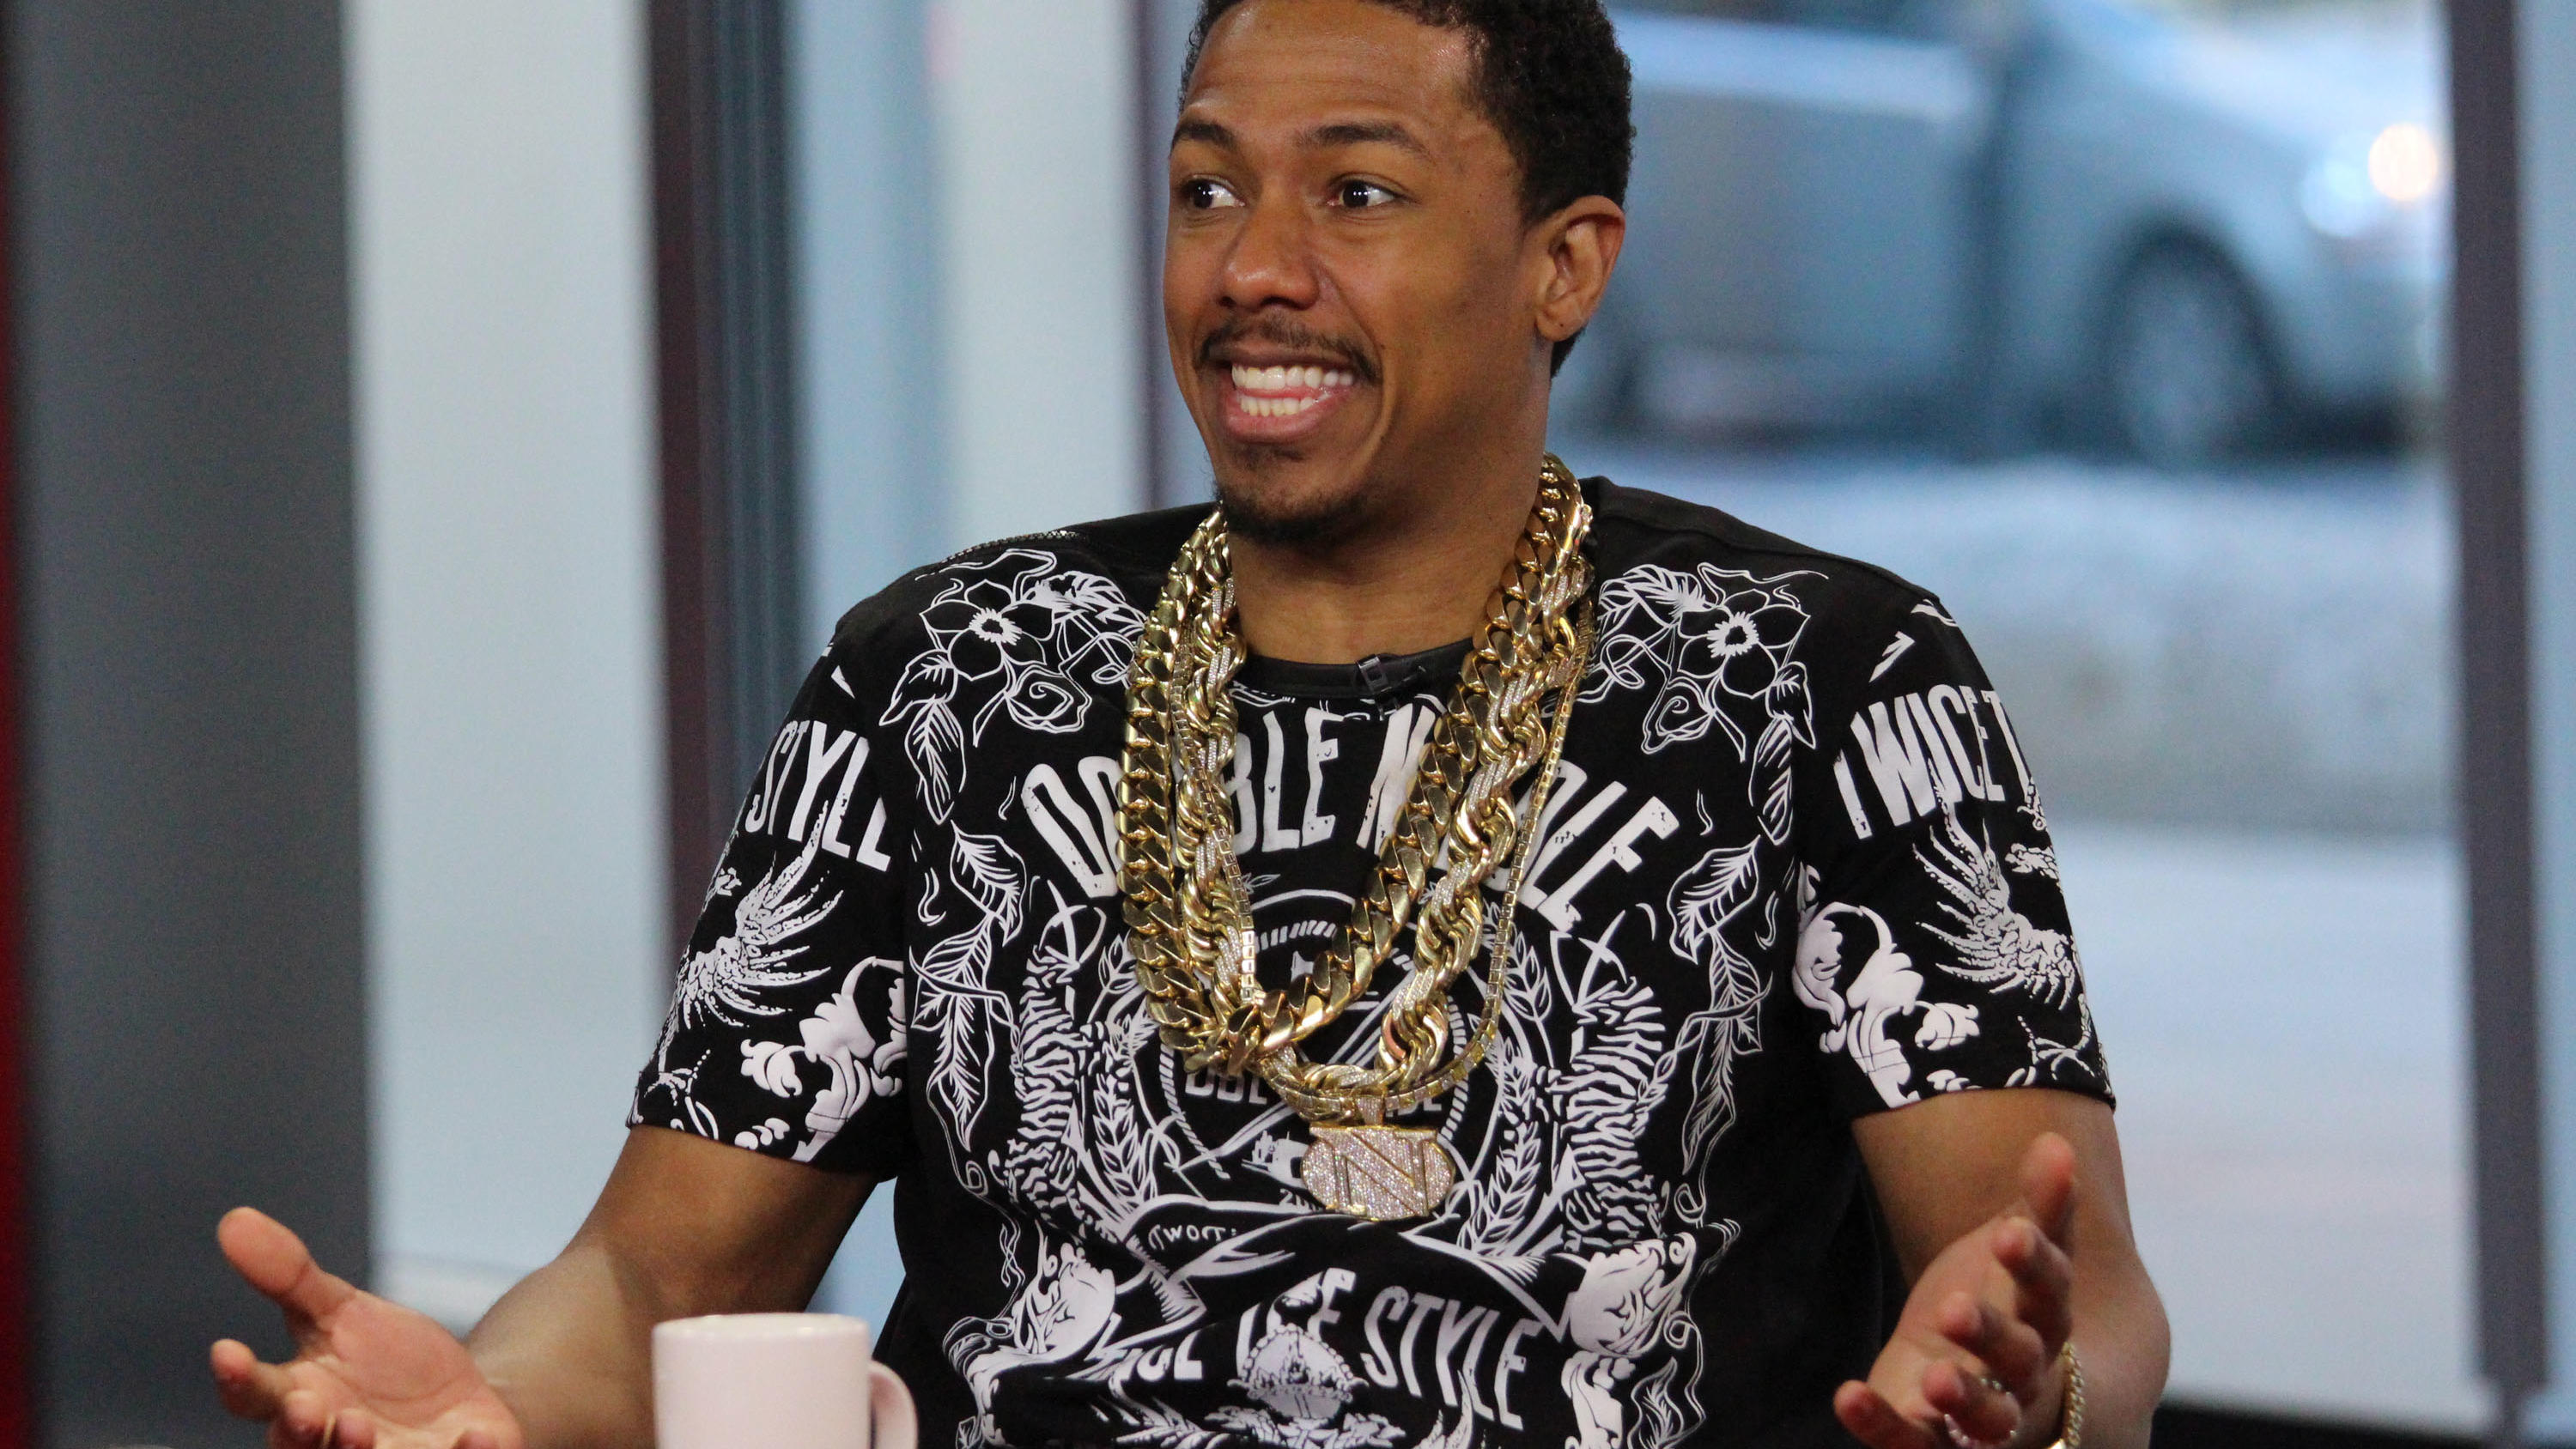 Nick cannon and his girlfriend brittany bell welcome their second child